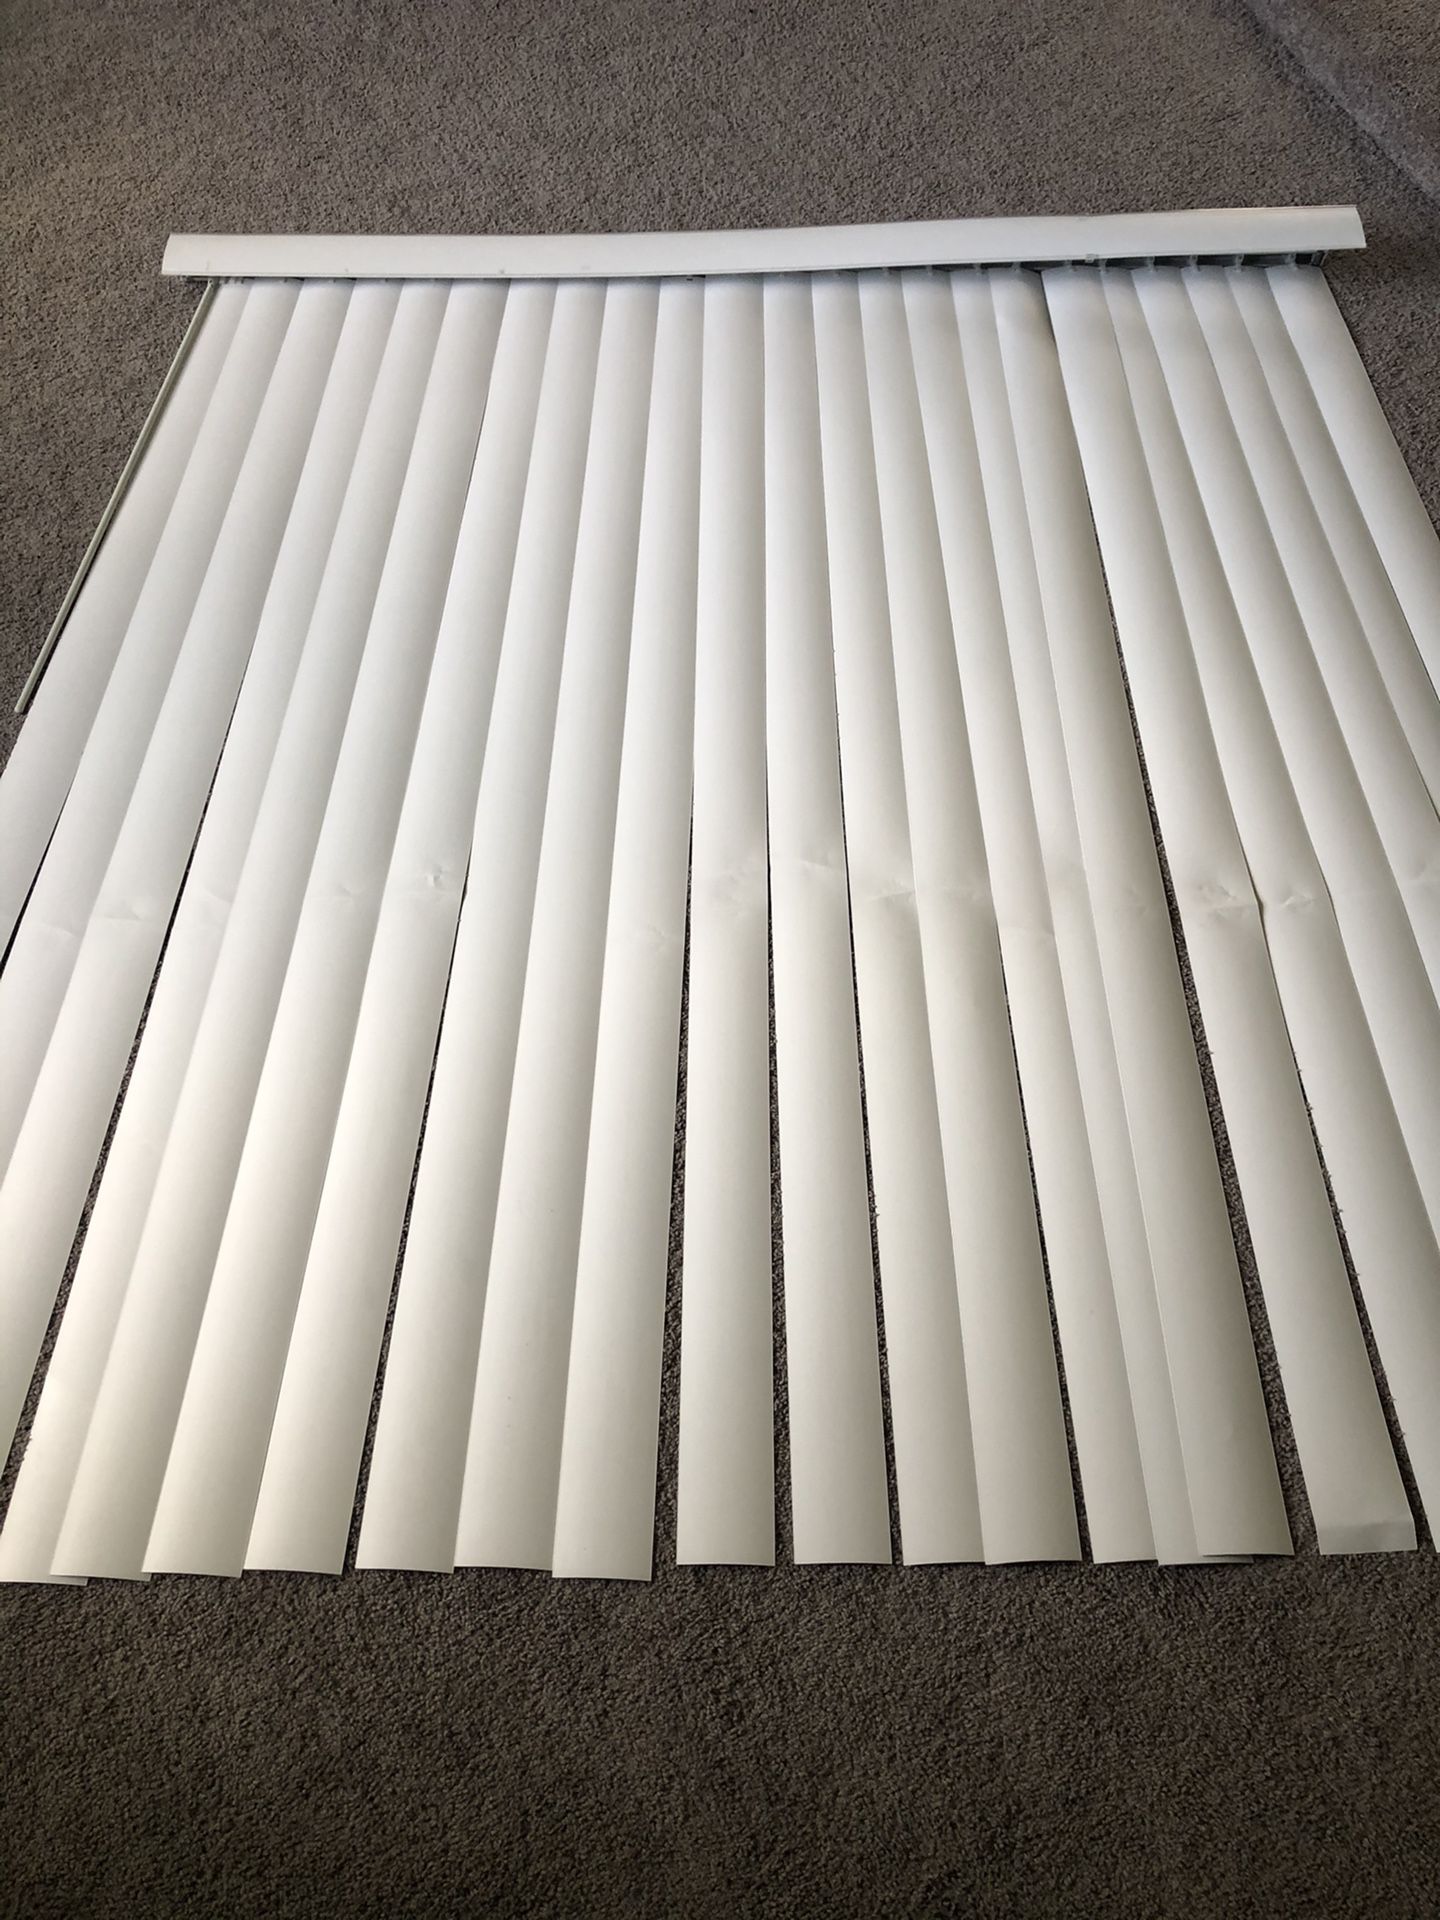 Patio blind 71x75 with replacement strips